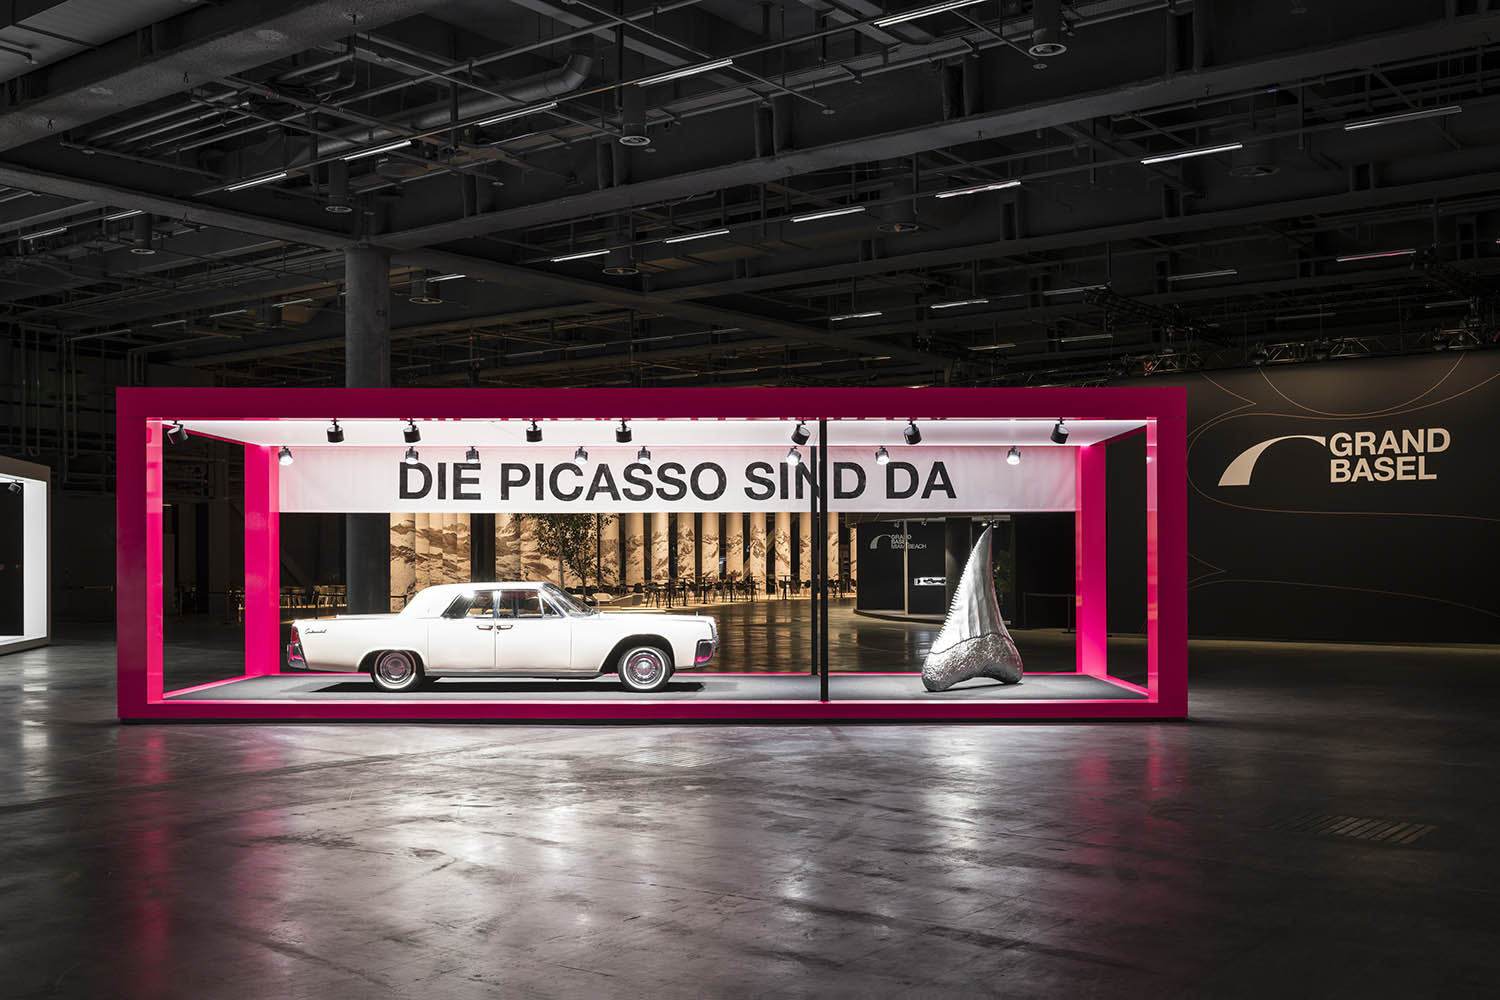 GBB_2018-Lincoln_continental_picasso-_Grand_Basel_2889-klein_HiRes.jpg